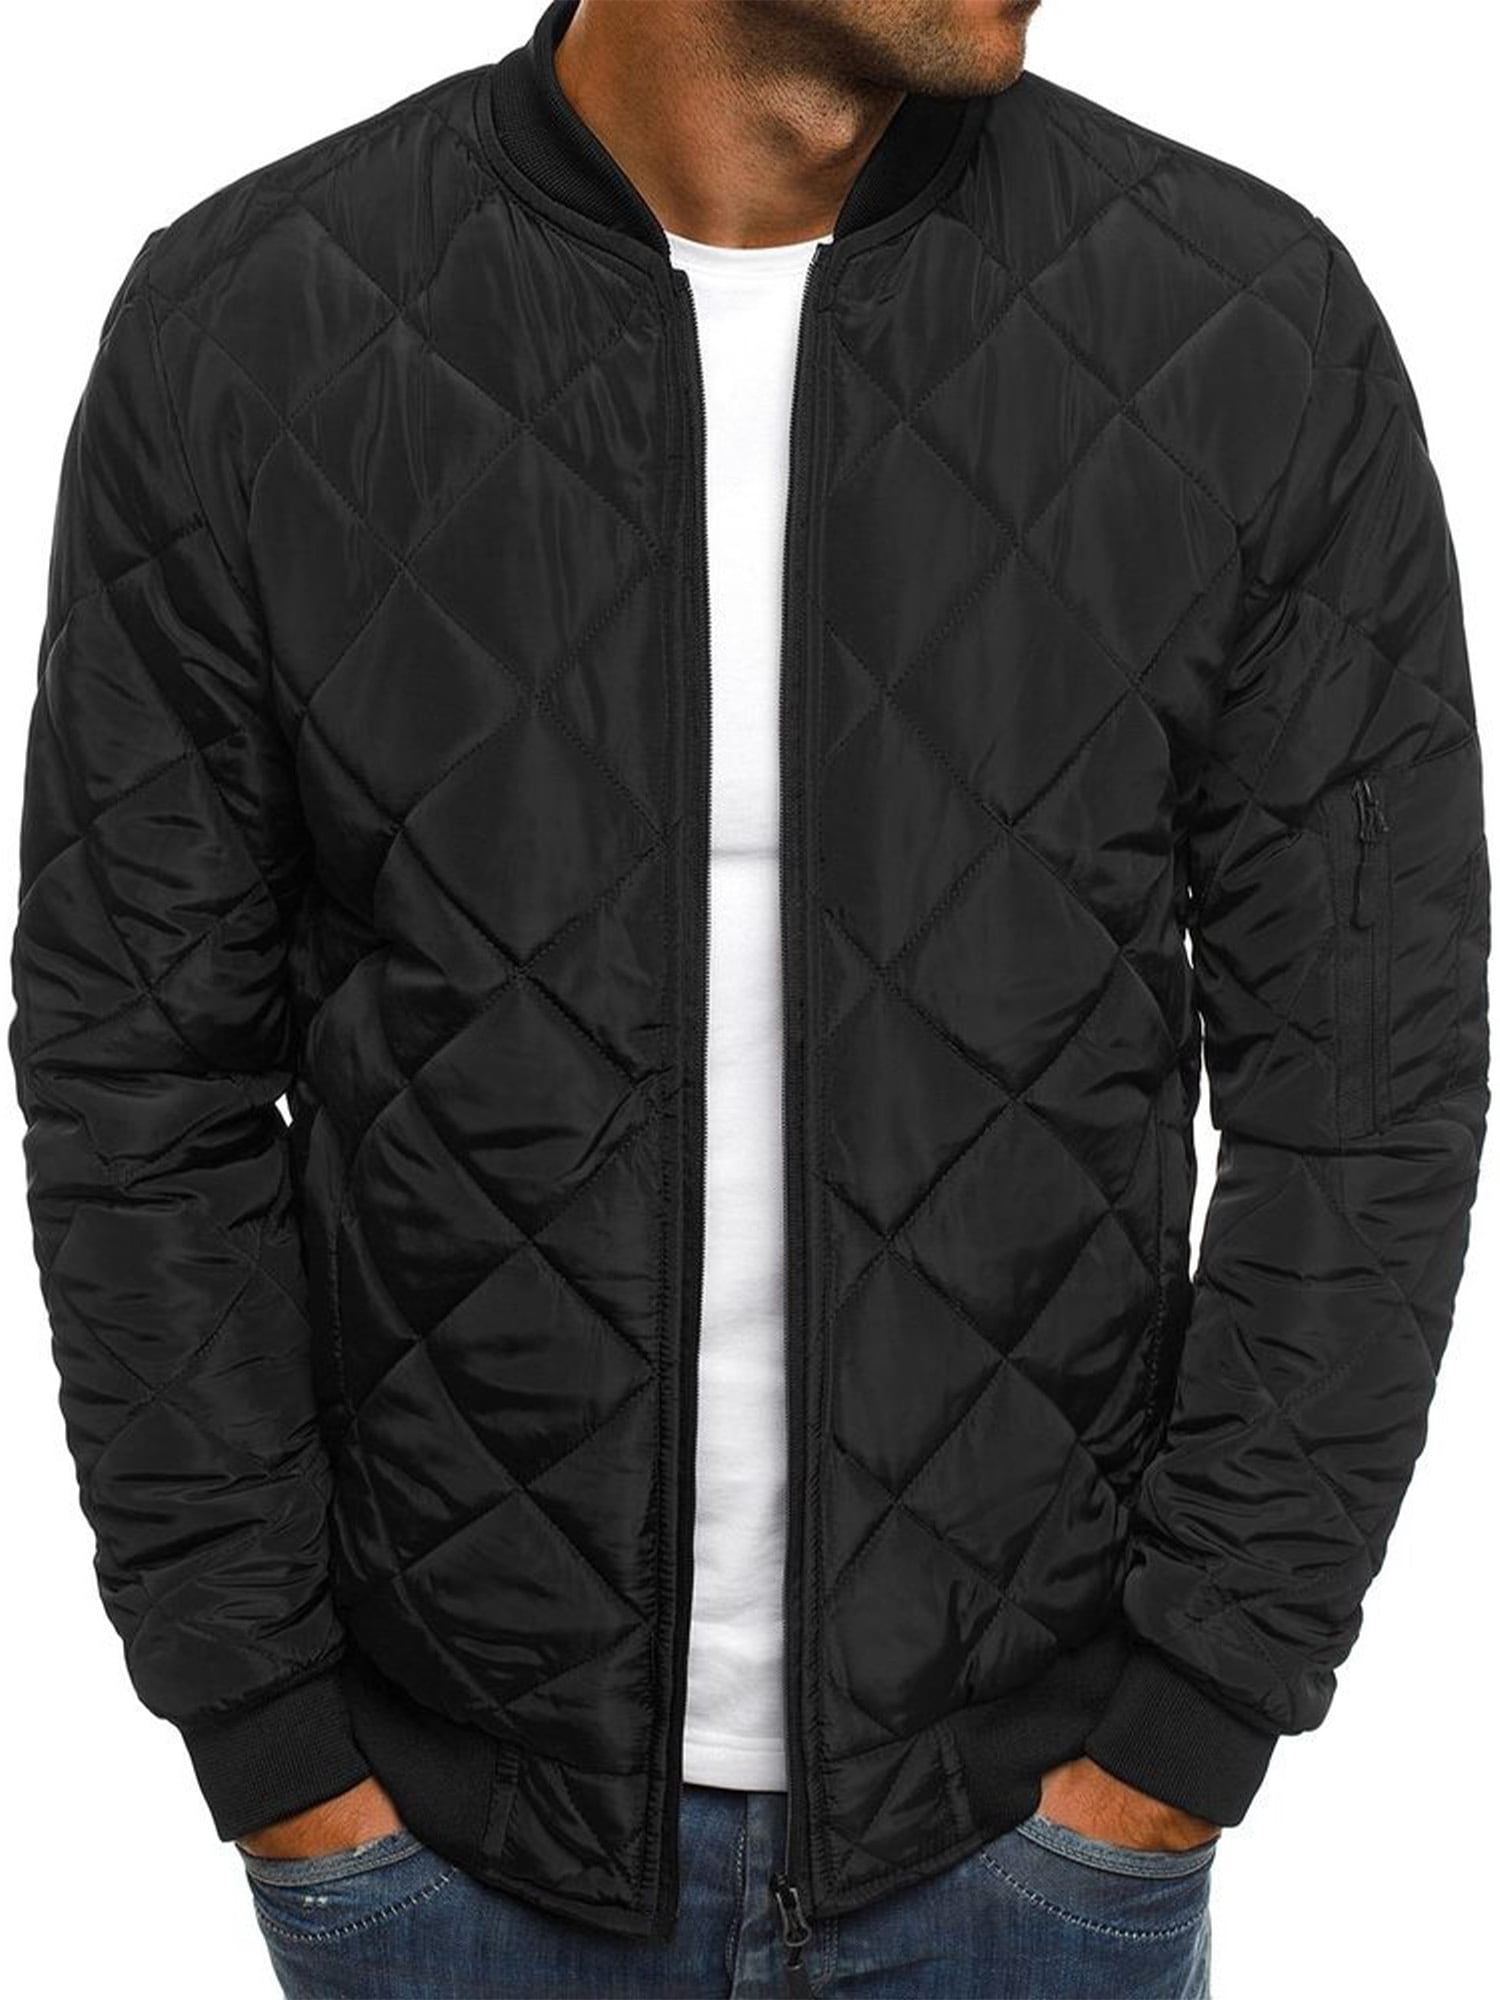 MADHERO Mens Bomber Jacket Quilted Lightweight Winter Outerwear Coat 